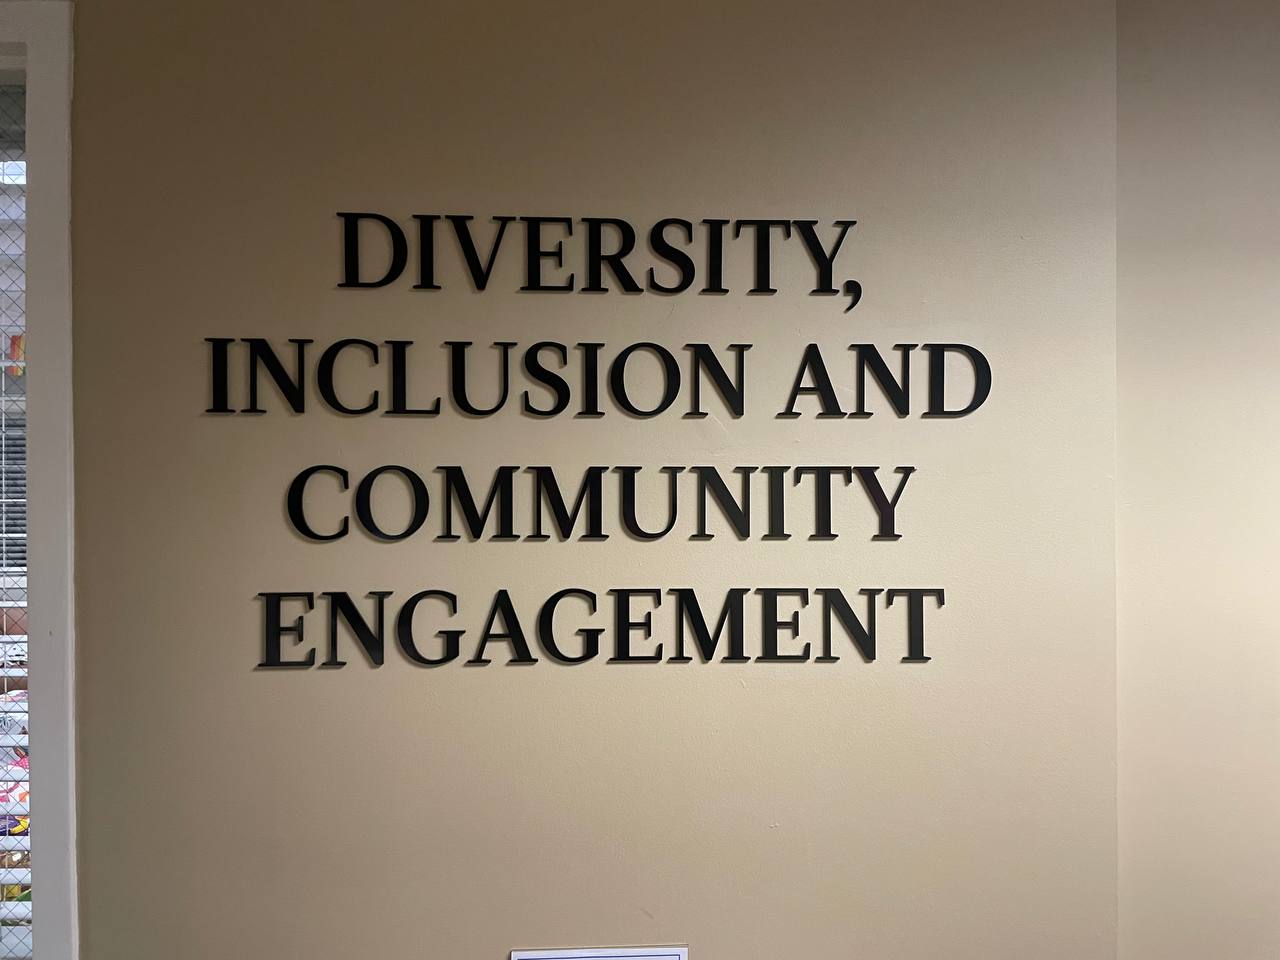 Queens University of Charlotte - Diversity, Inclusion and Community Engagement Sign